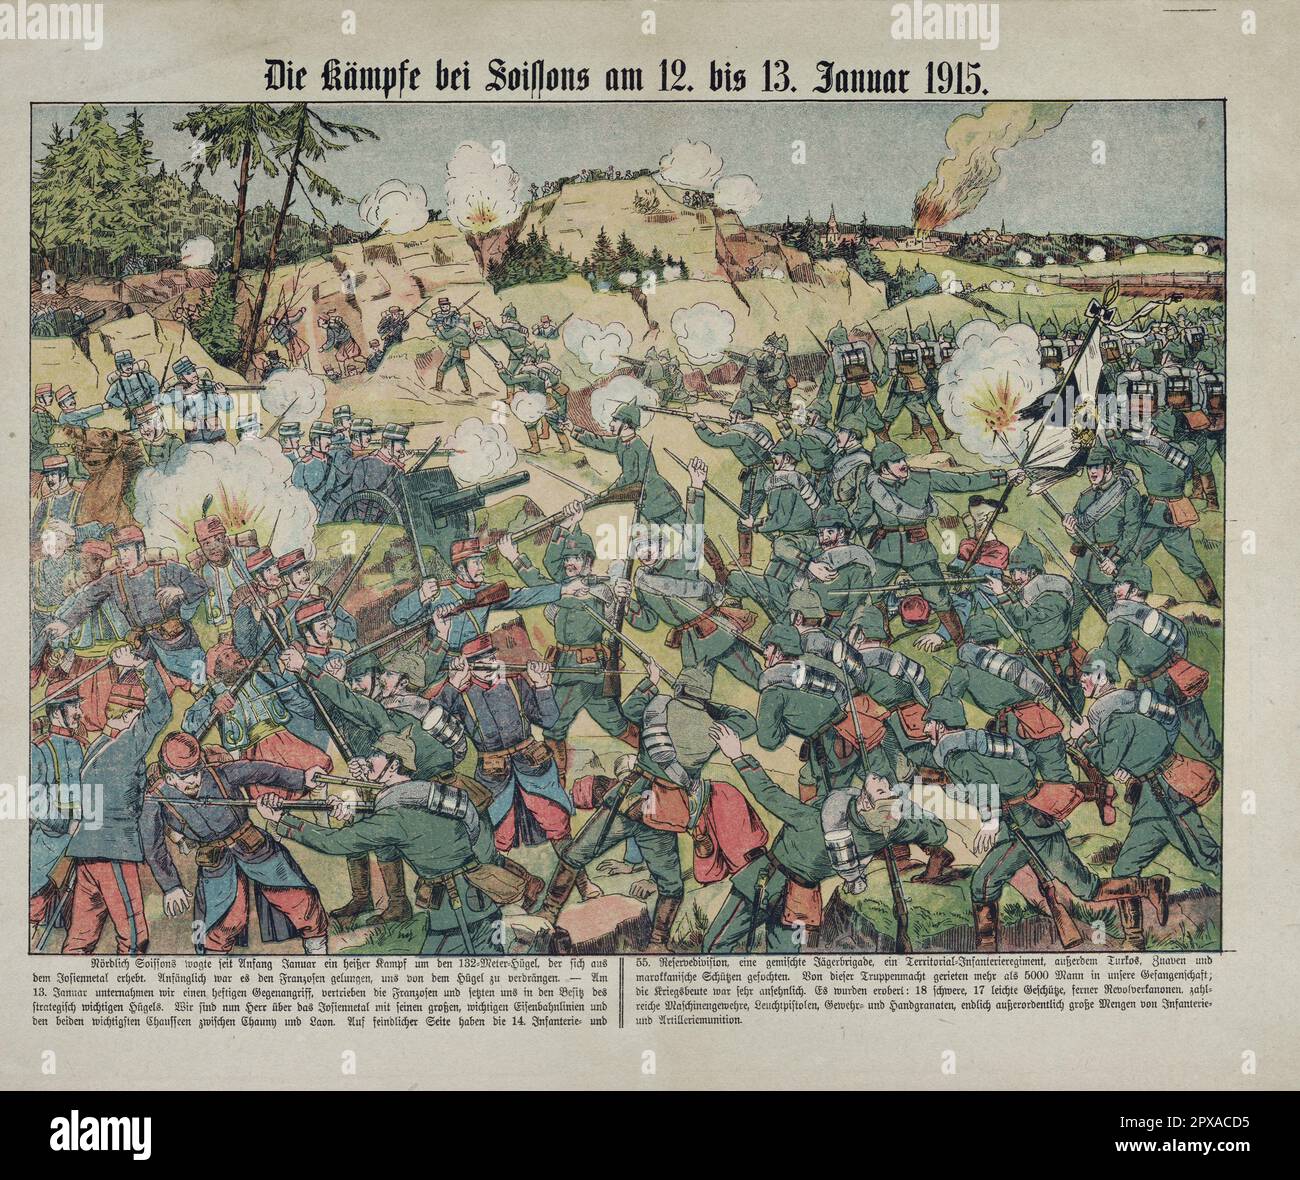 German propaganda poster of World War I: The fighting at Soissons on January 12-13, 1915. The Battle of Soissons (French: La Bataille de Crouy ) was part of the First World War and took place from January 8-14, 1915 on the central western front on the Aisne section north of Soissons . The conflict served on the German side as a diversionary attack and relief from the attacks launched by the French in Champagne and Artois at the same time . Parts of the German 1st Army succeeded in repelling French attacks and stabilizing the situation after a counterattack. The newly won front line could also Stock Photo